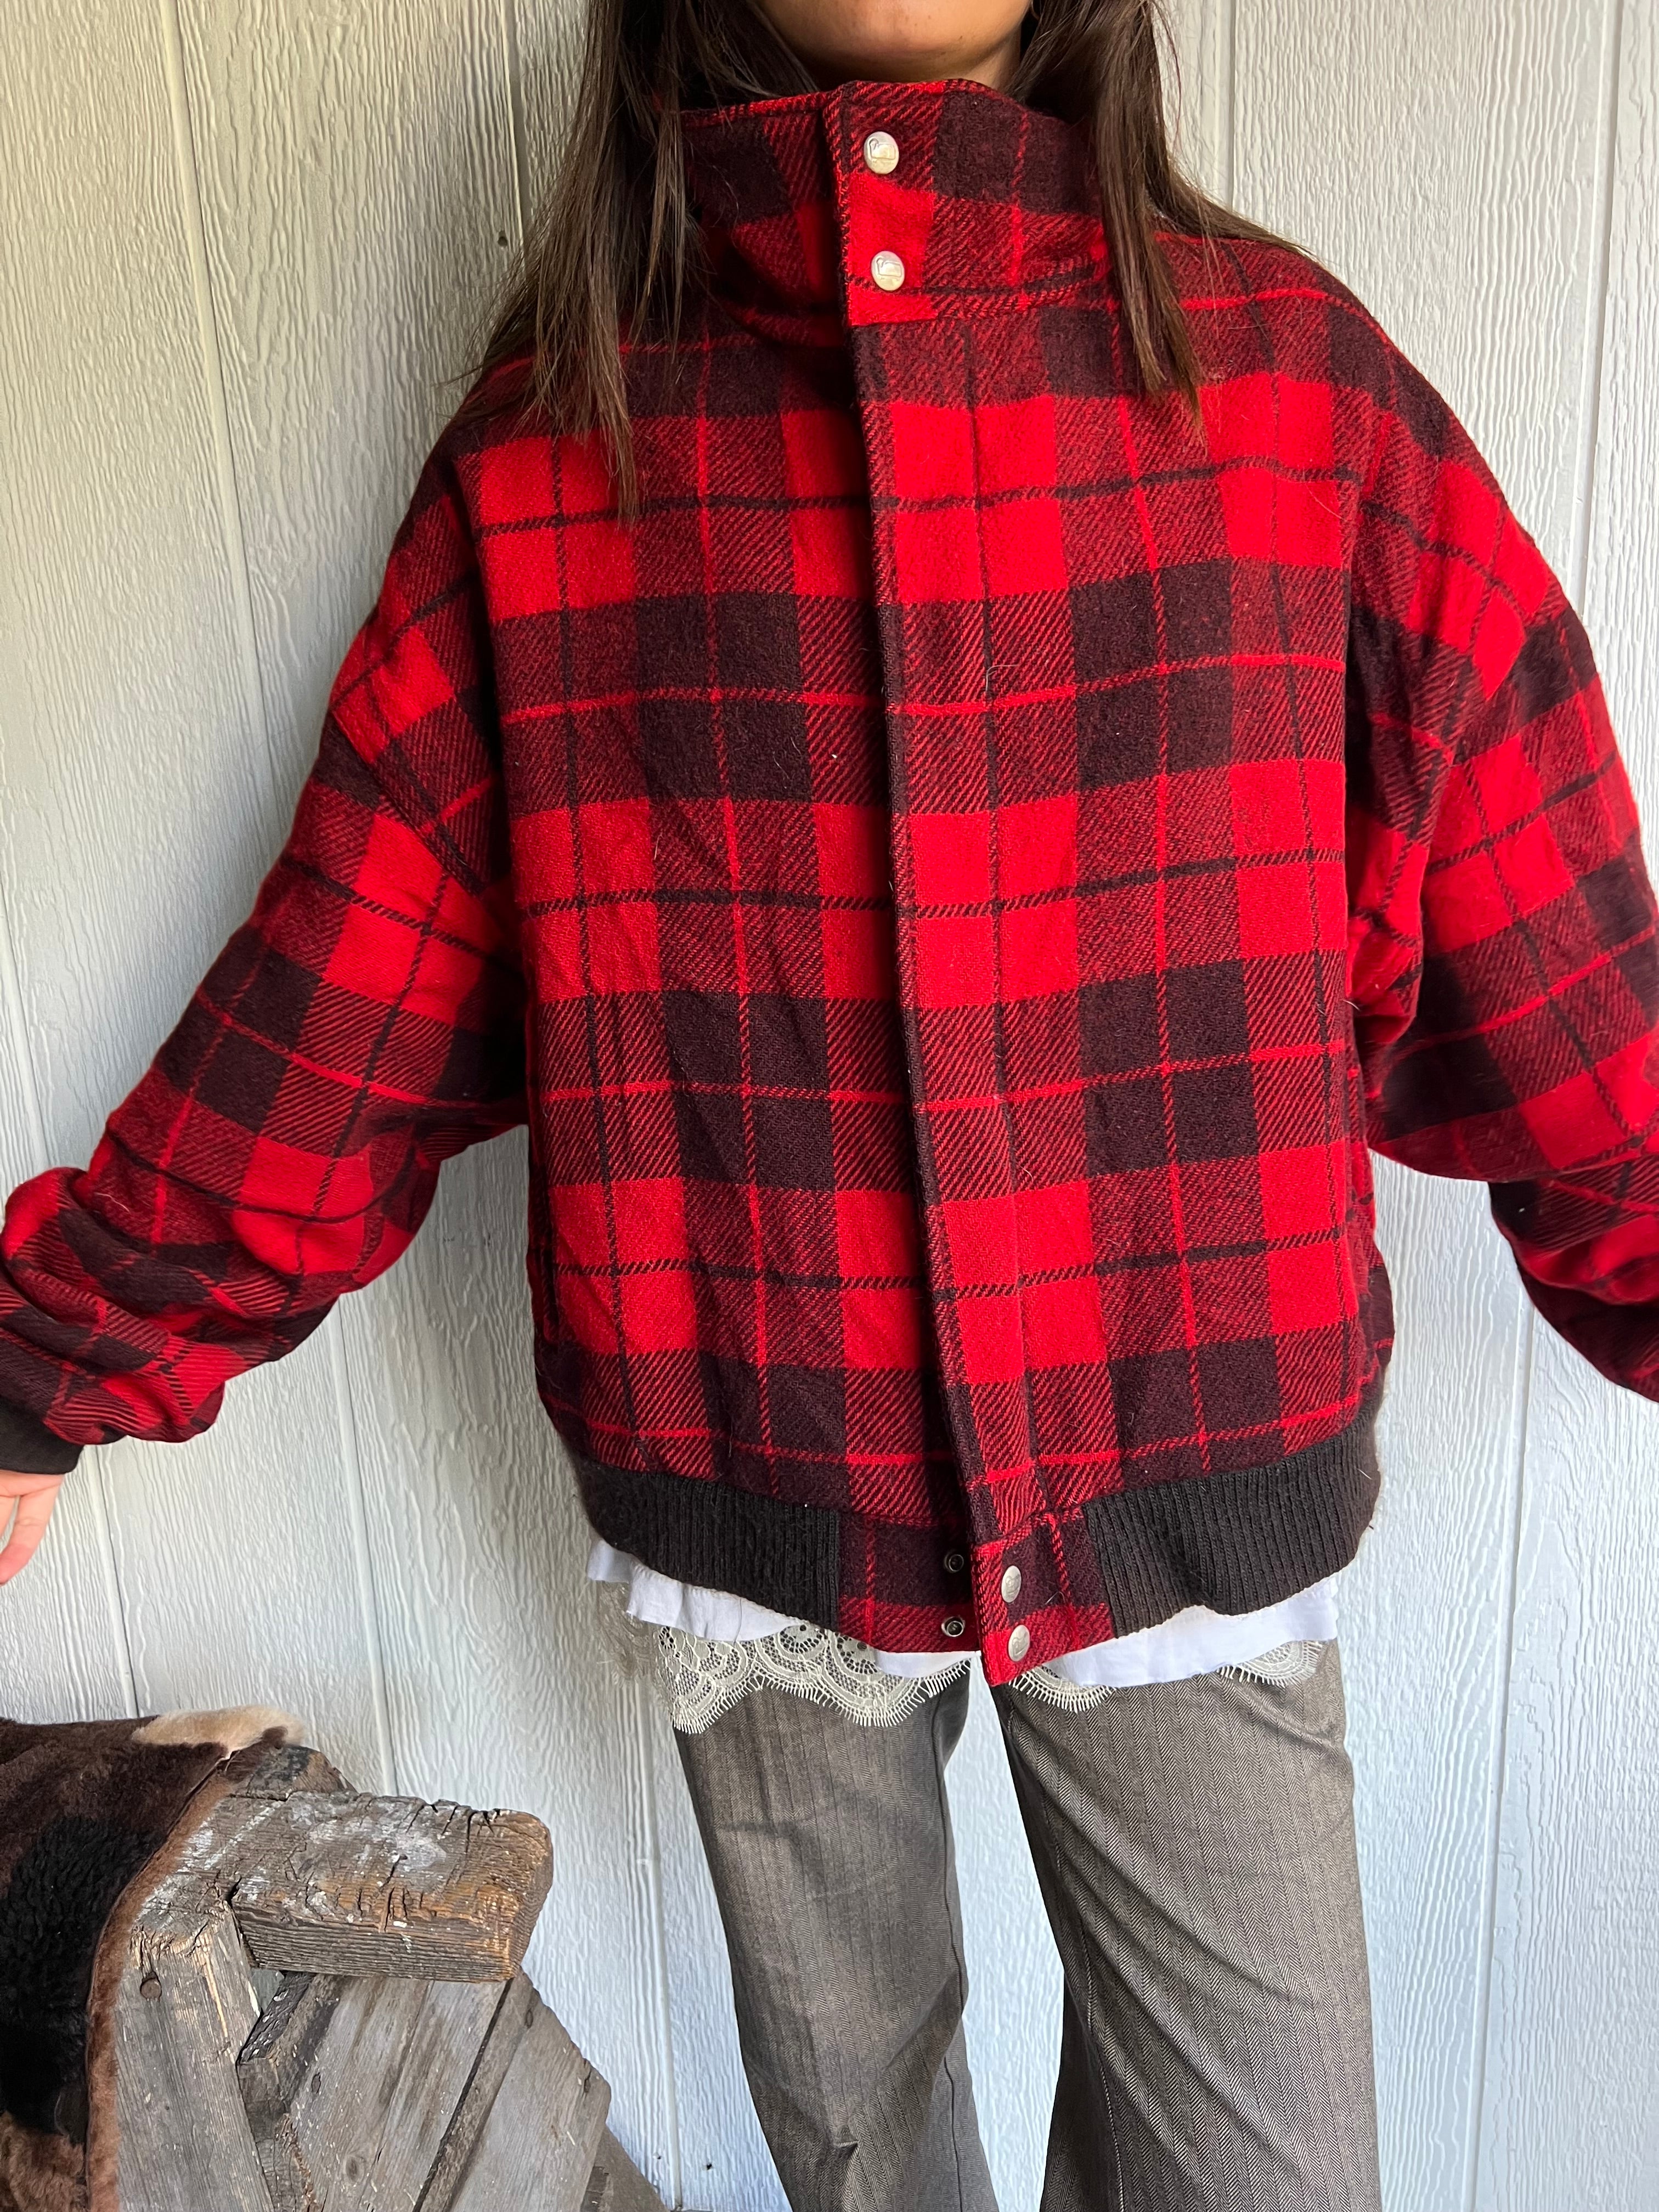 Red and Black Cropped Plaid Lumber Jacket